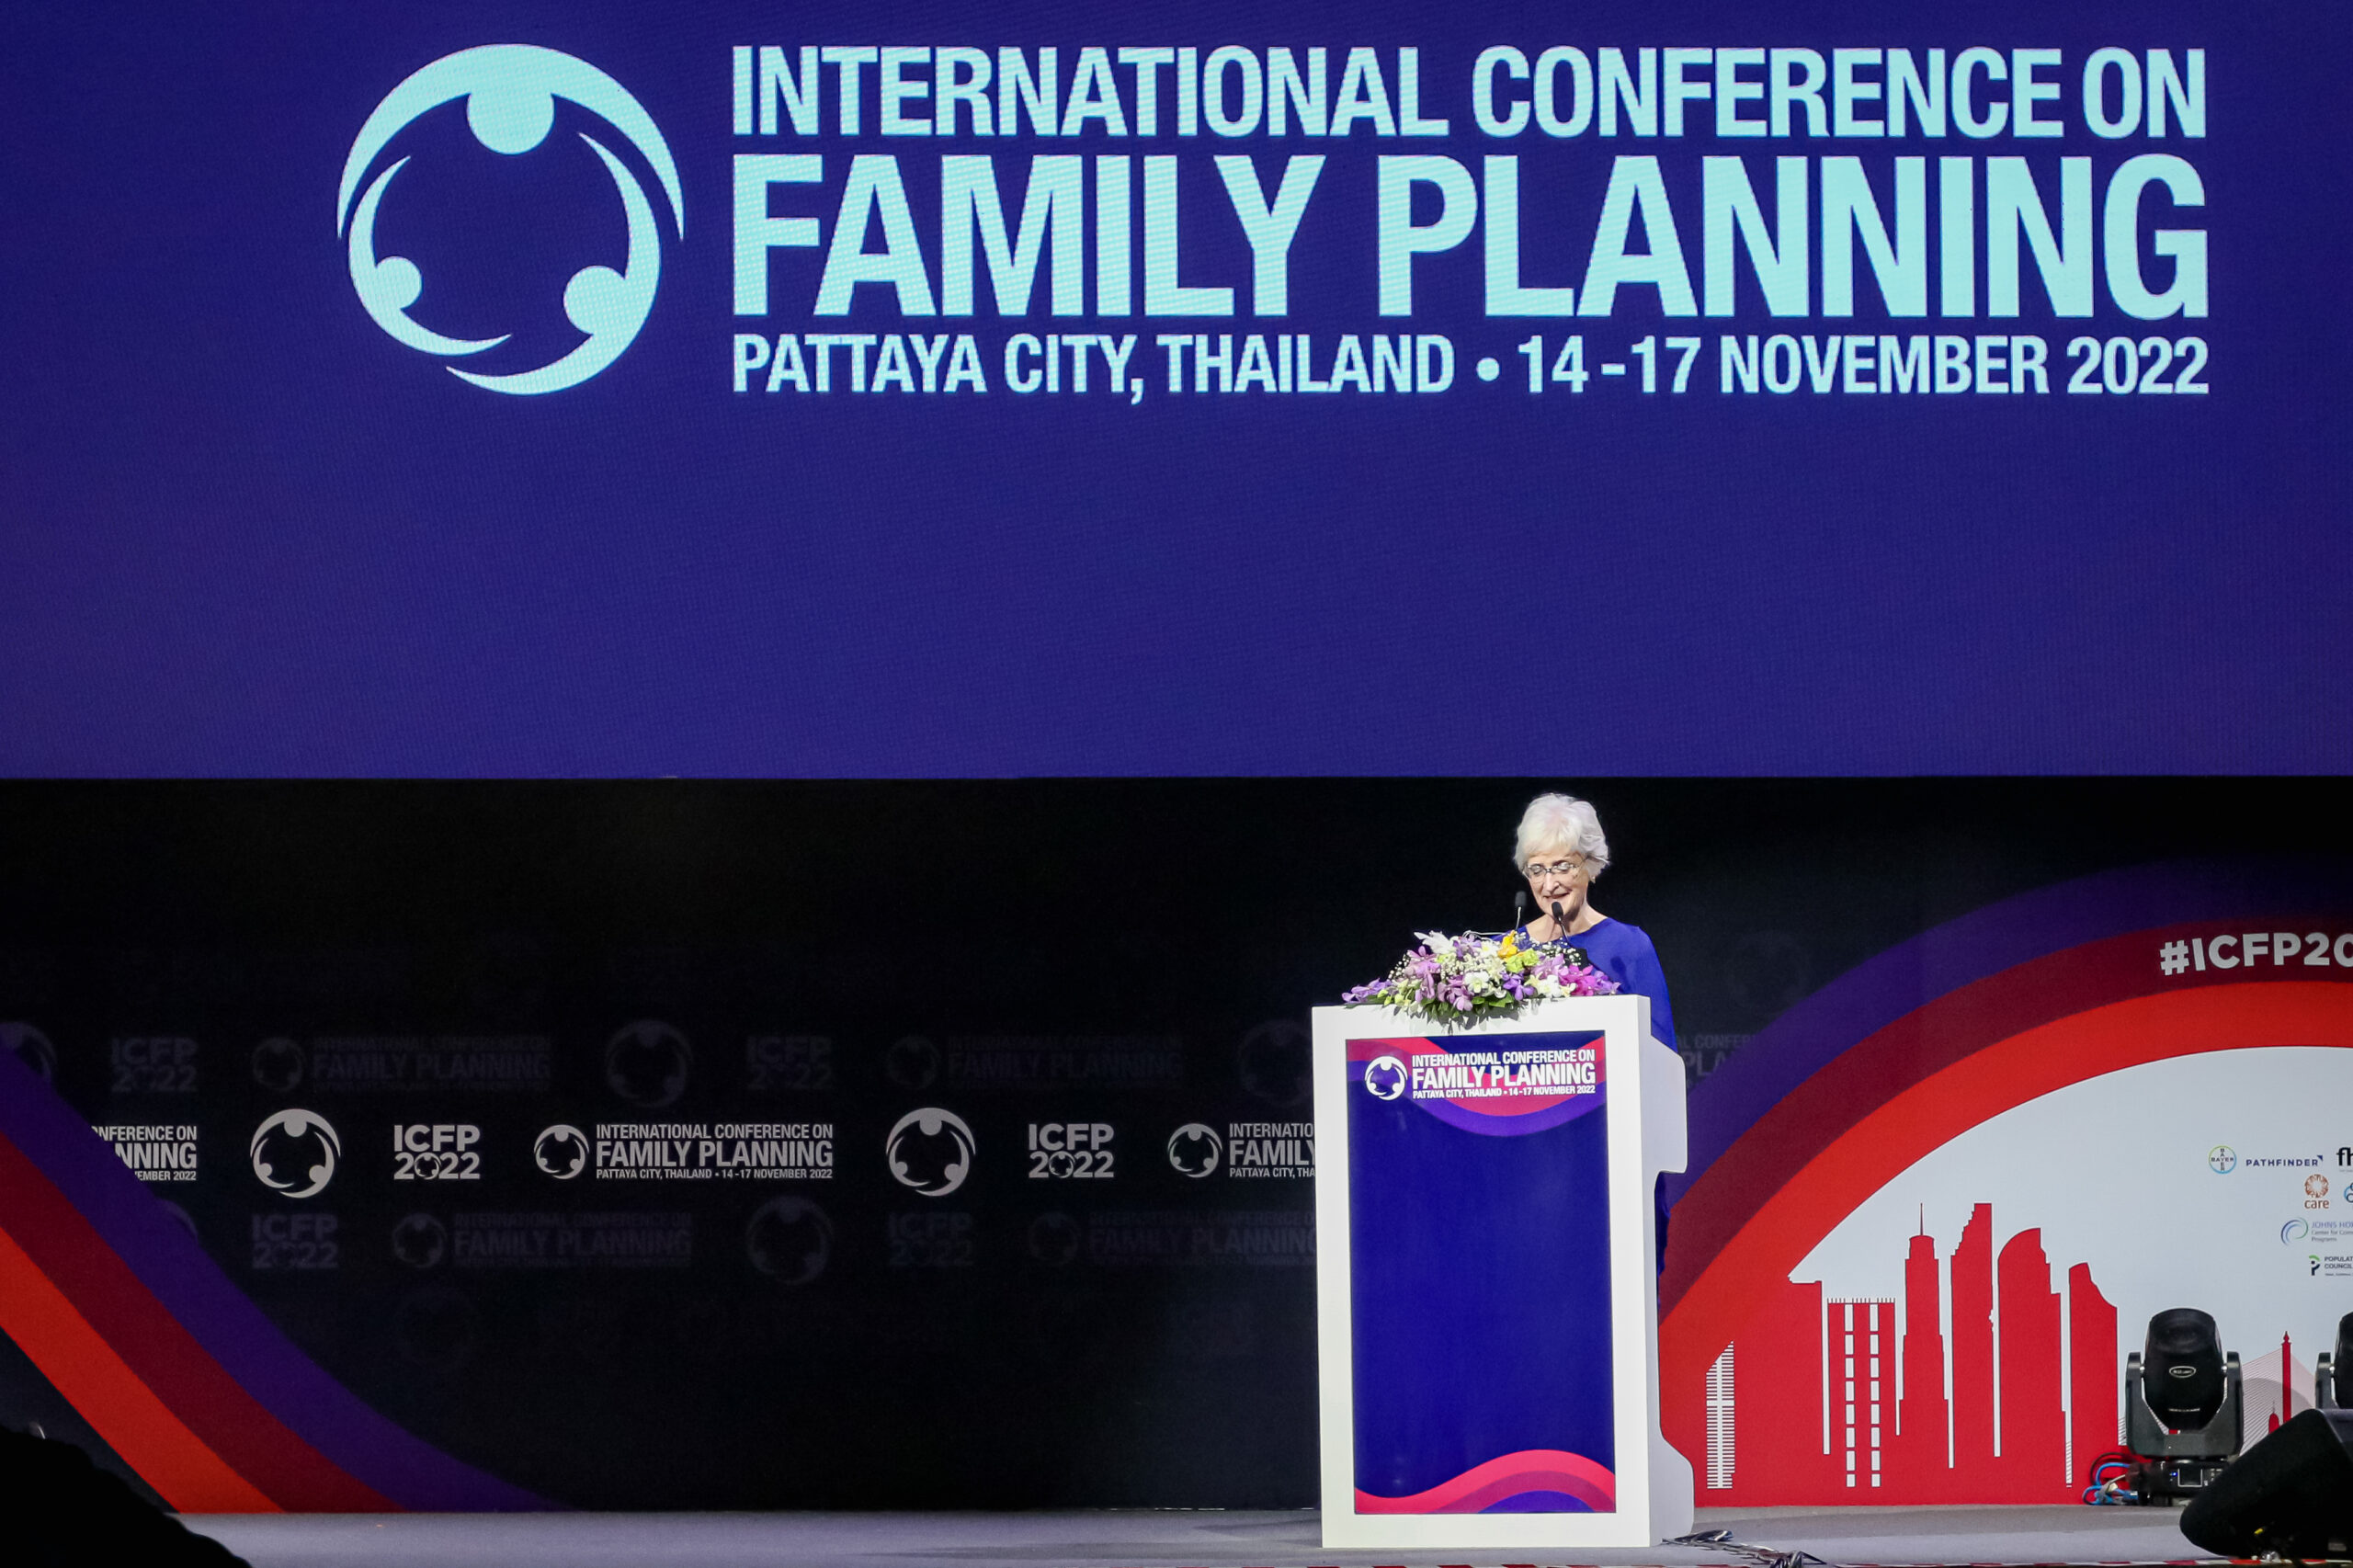 INTERNATIONAL CONFERENCE ON FAMILY PLANNING